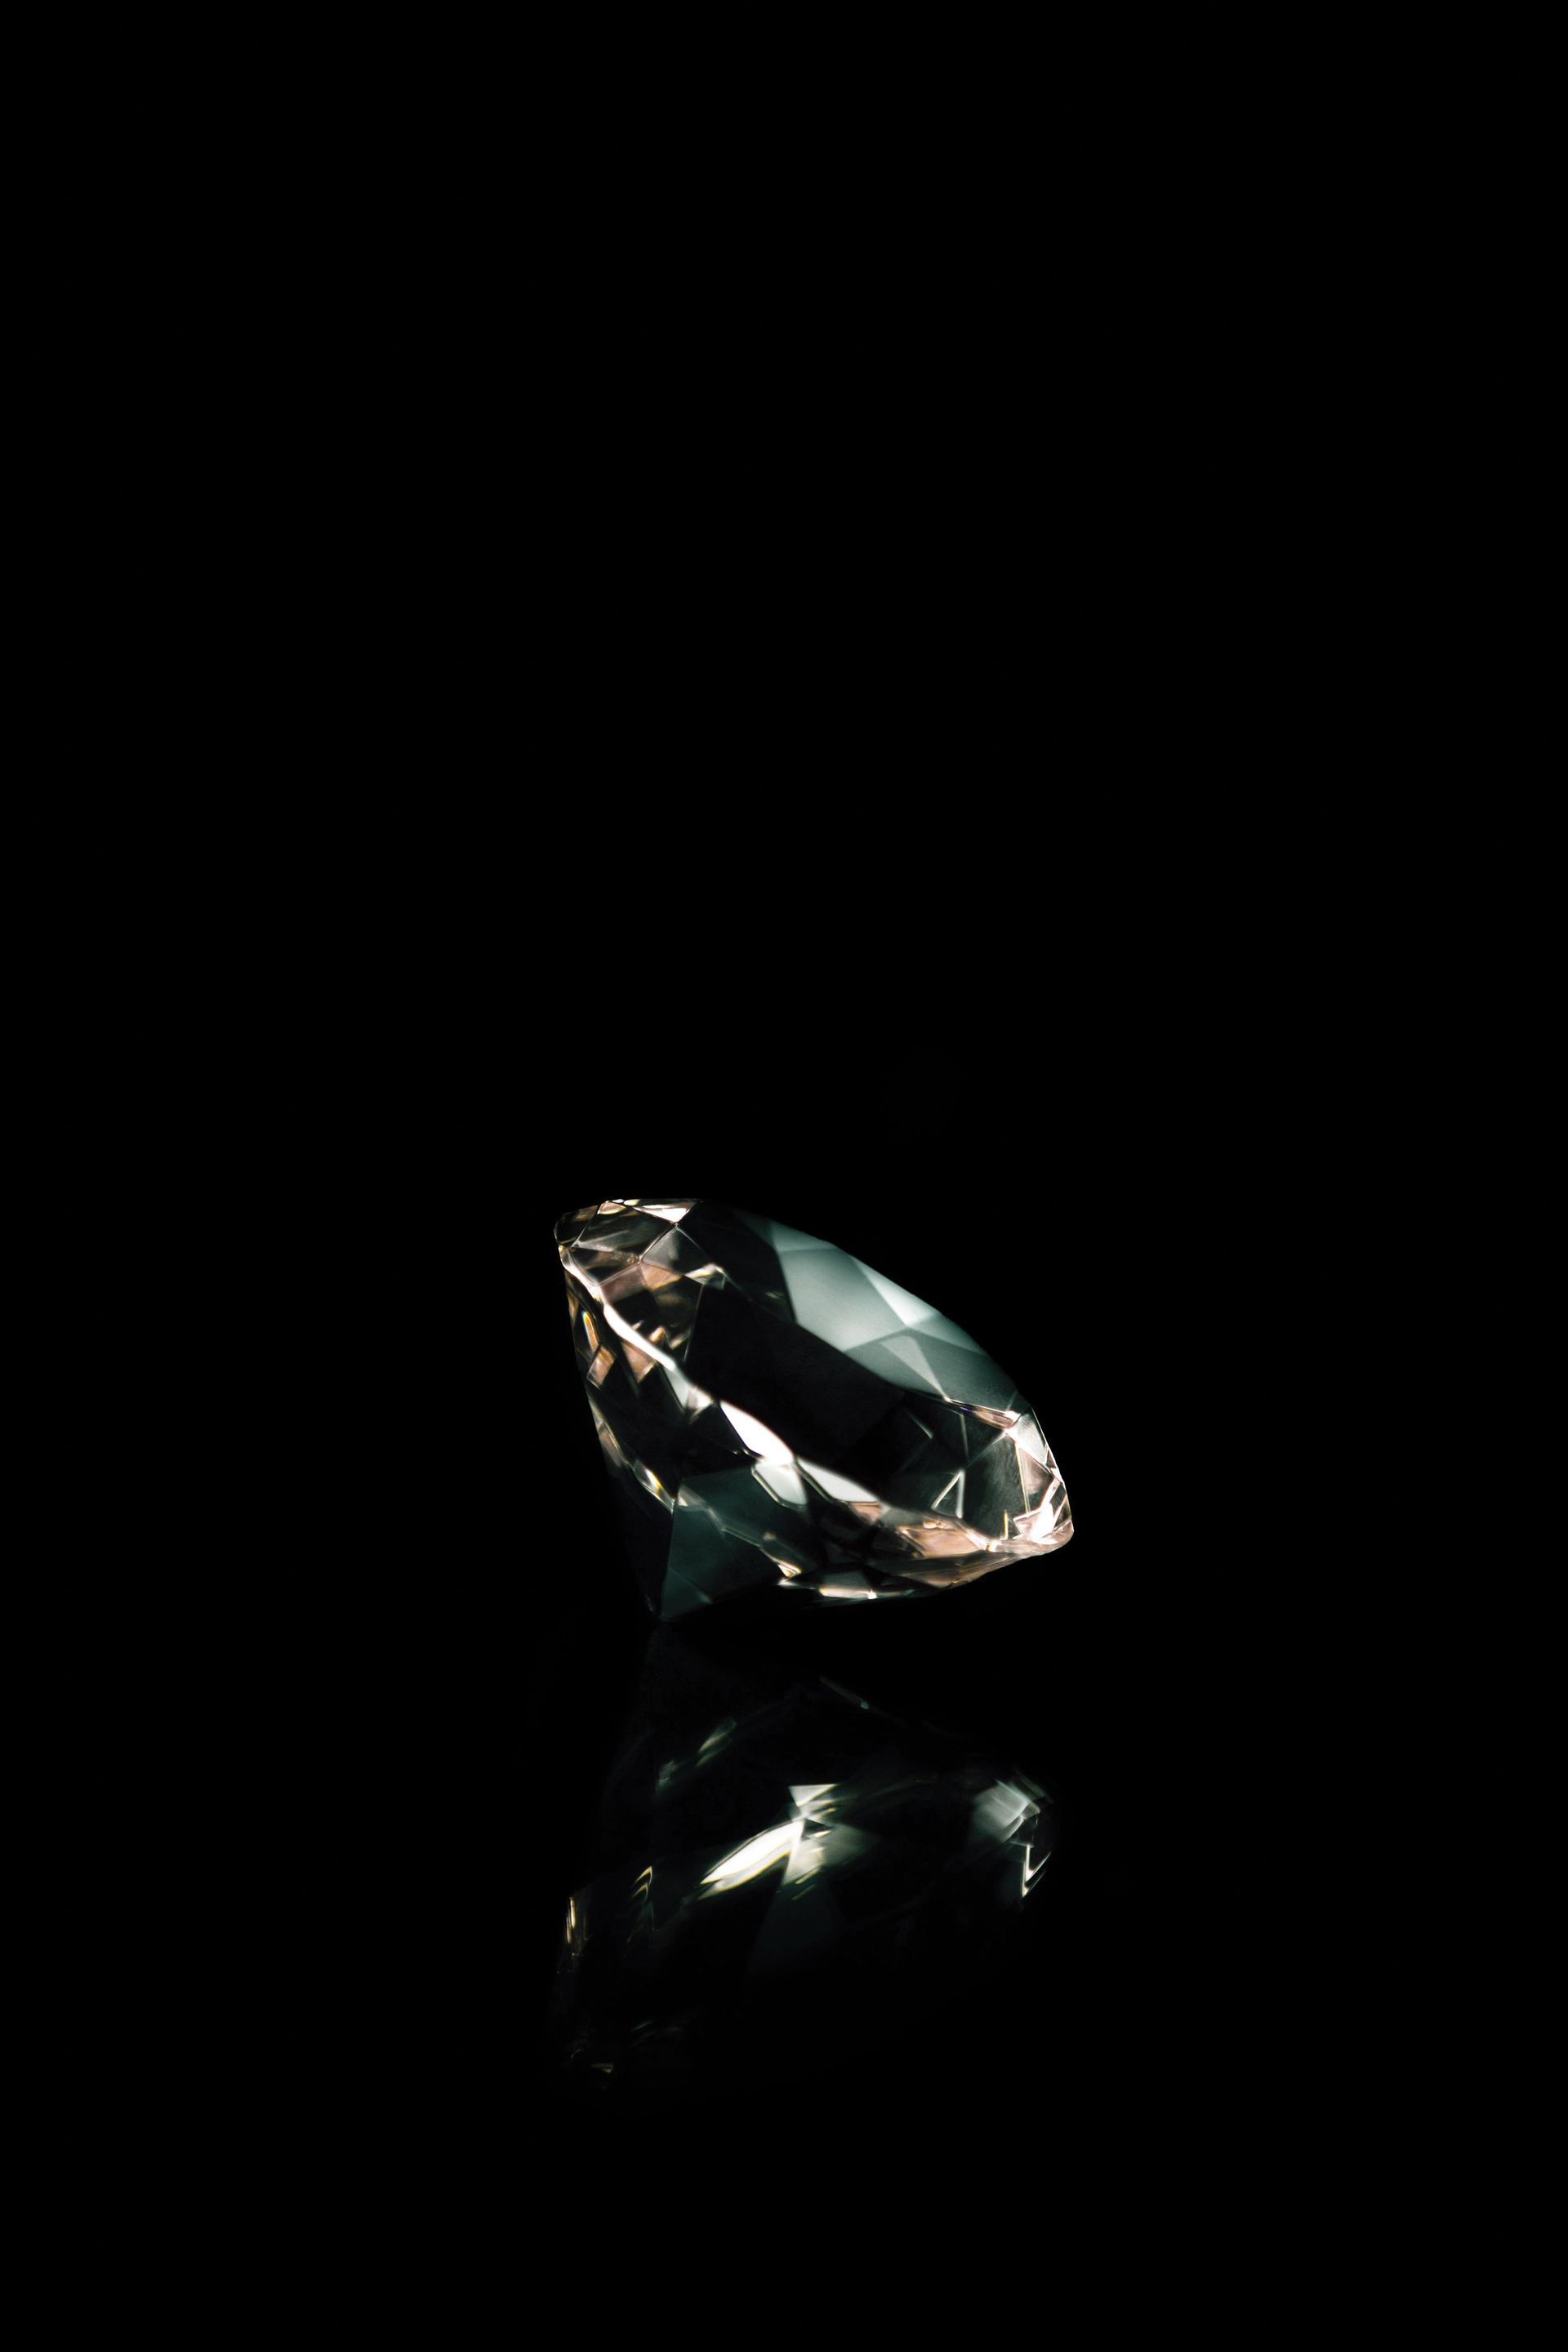 A diamond photographed against a black background.